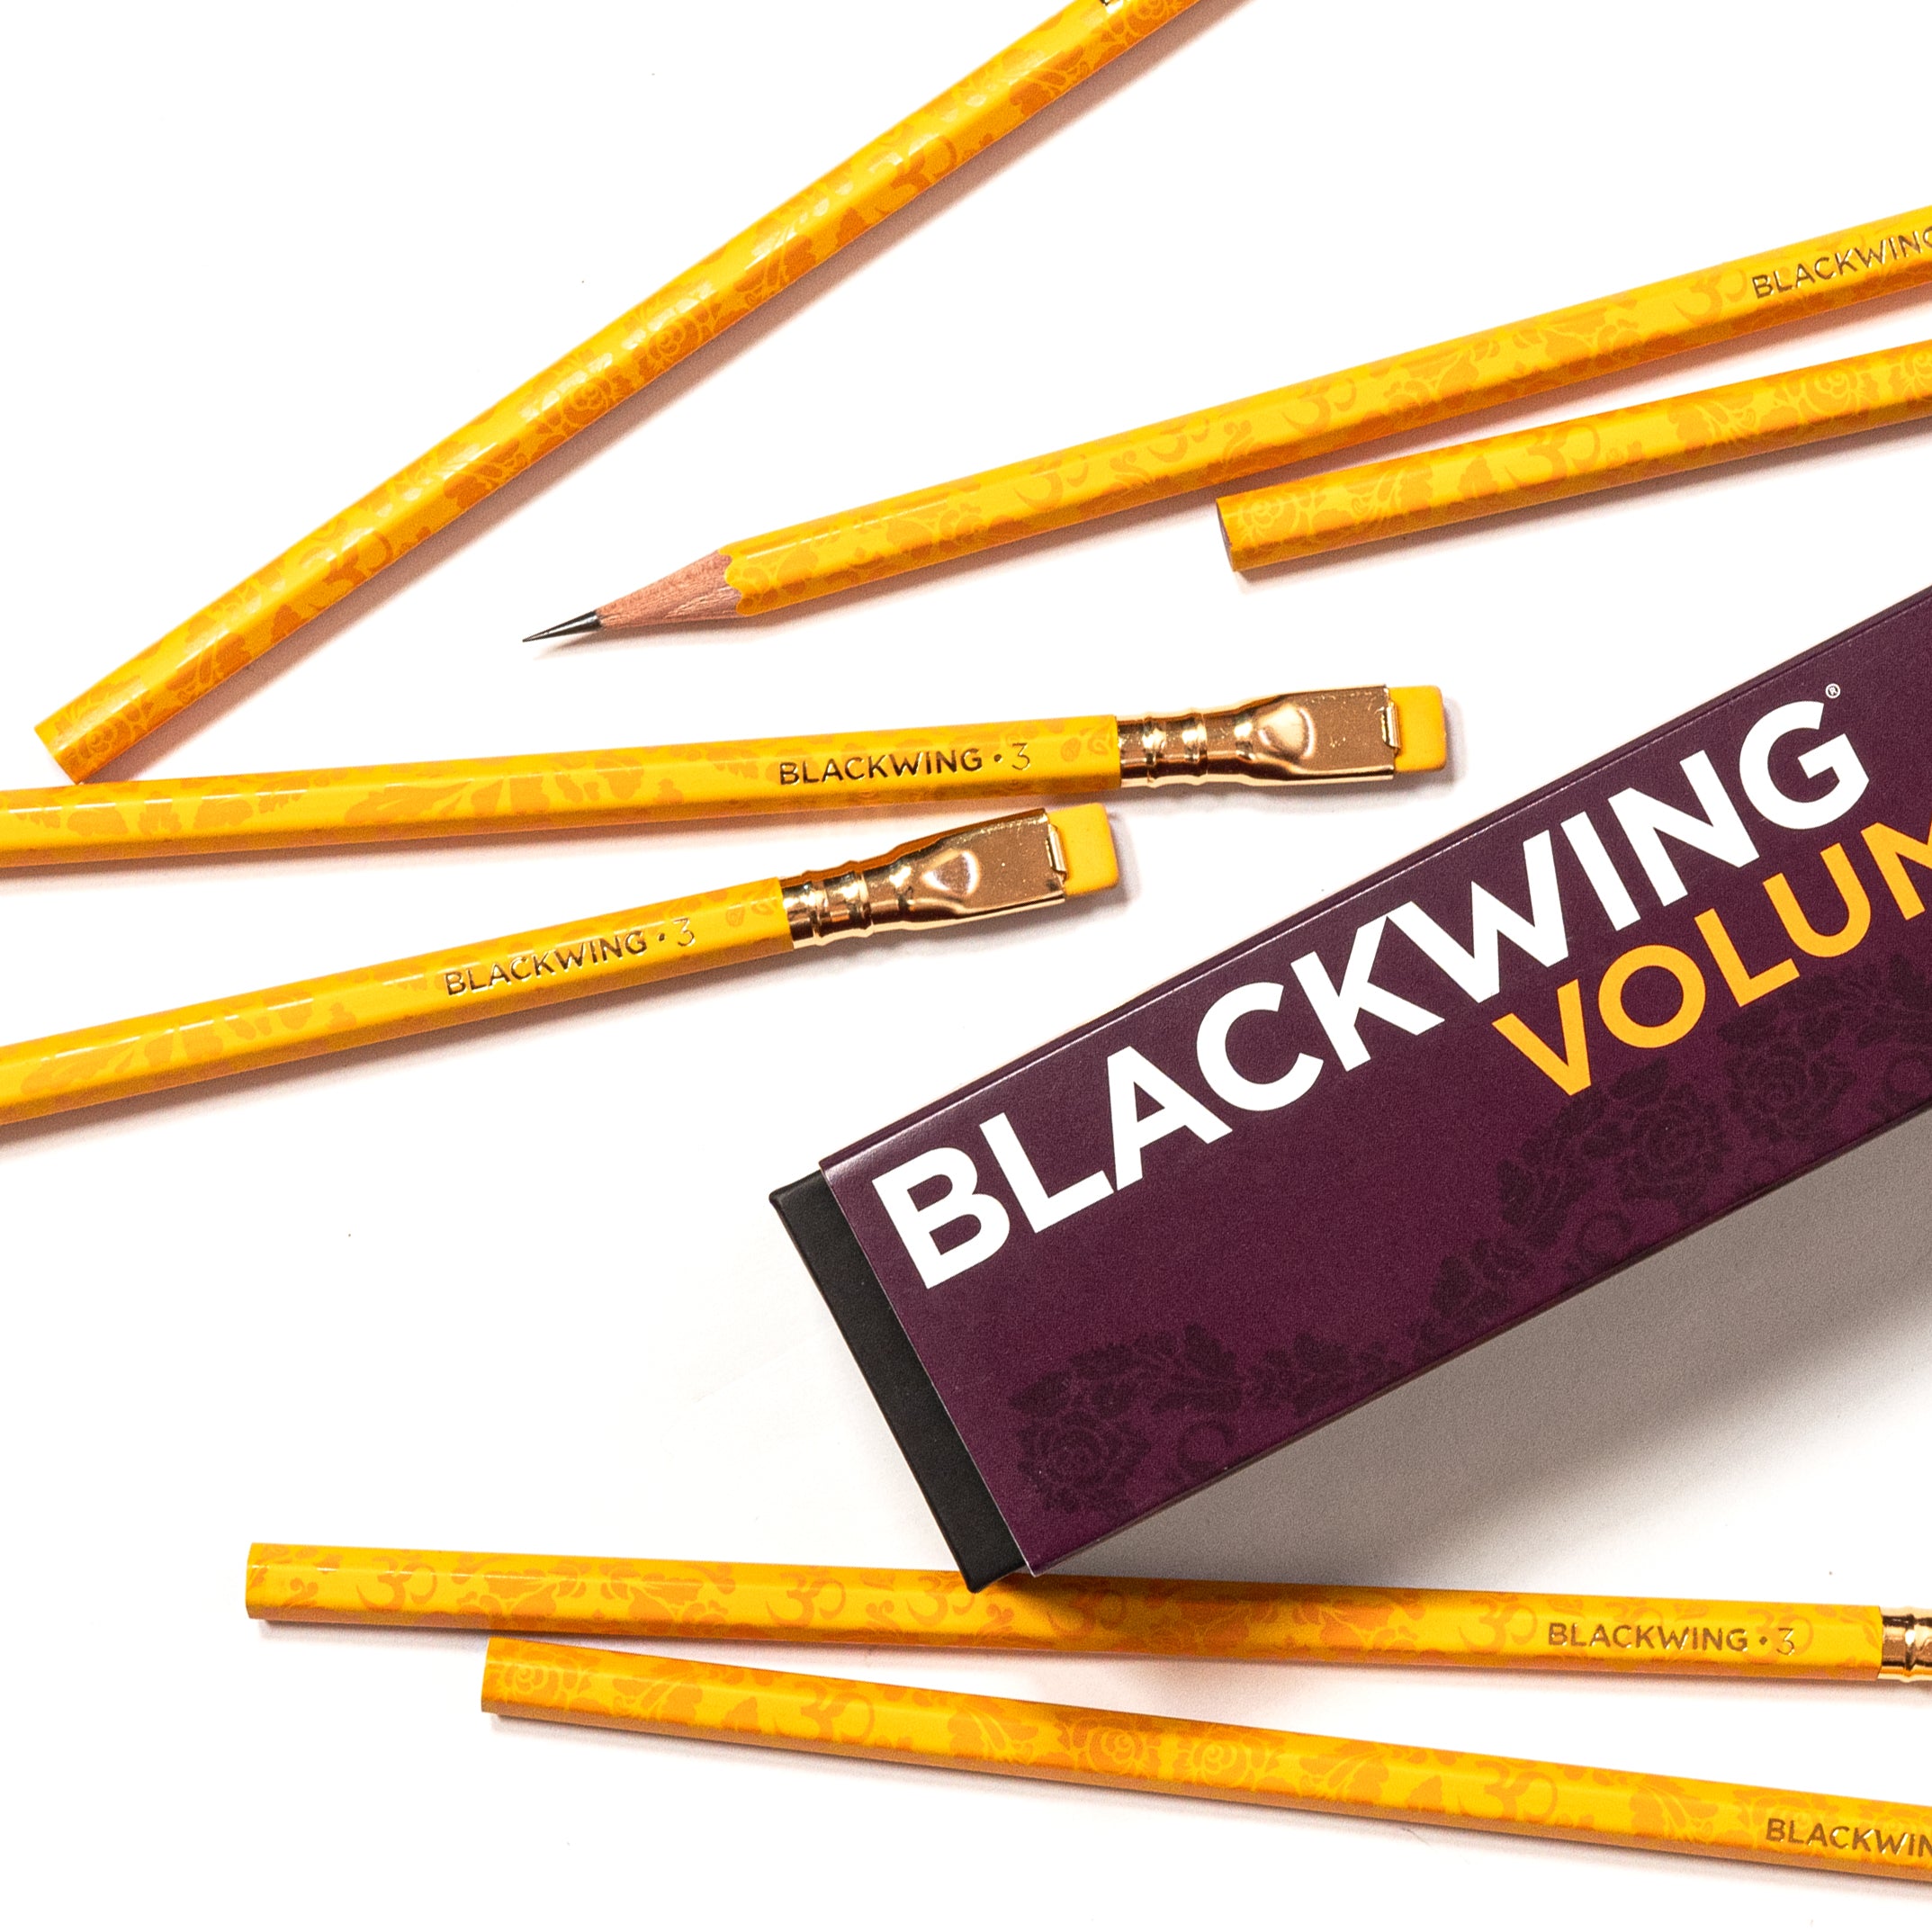  PALOMINO Blackwing 602 Original Soft Pencil, 12 Count(1 Dozen)  Gray Art, Eraser, Writing Instrument : Office Products